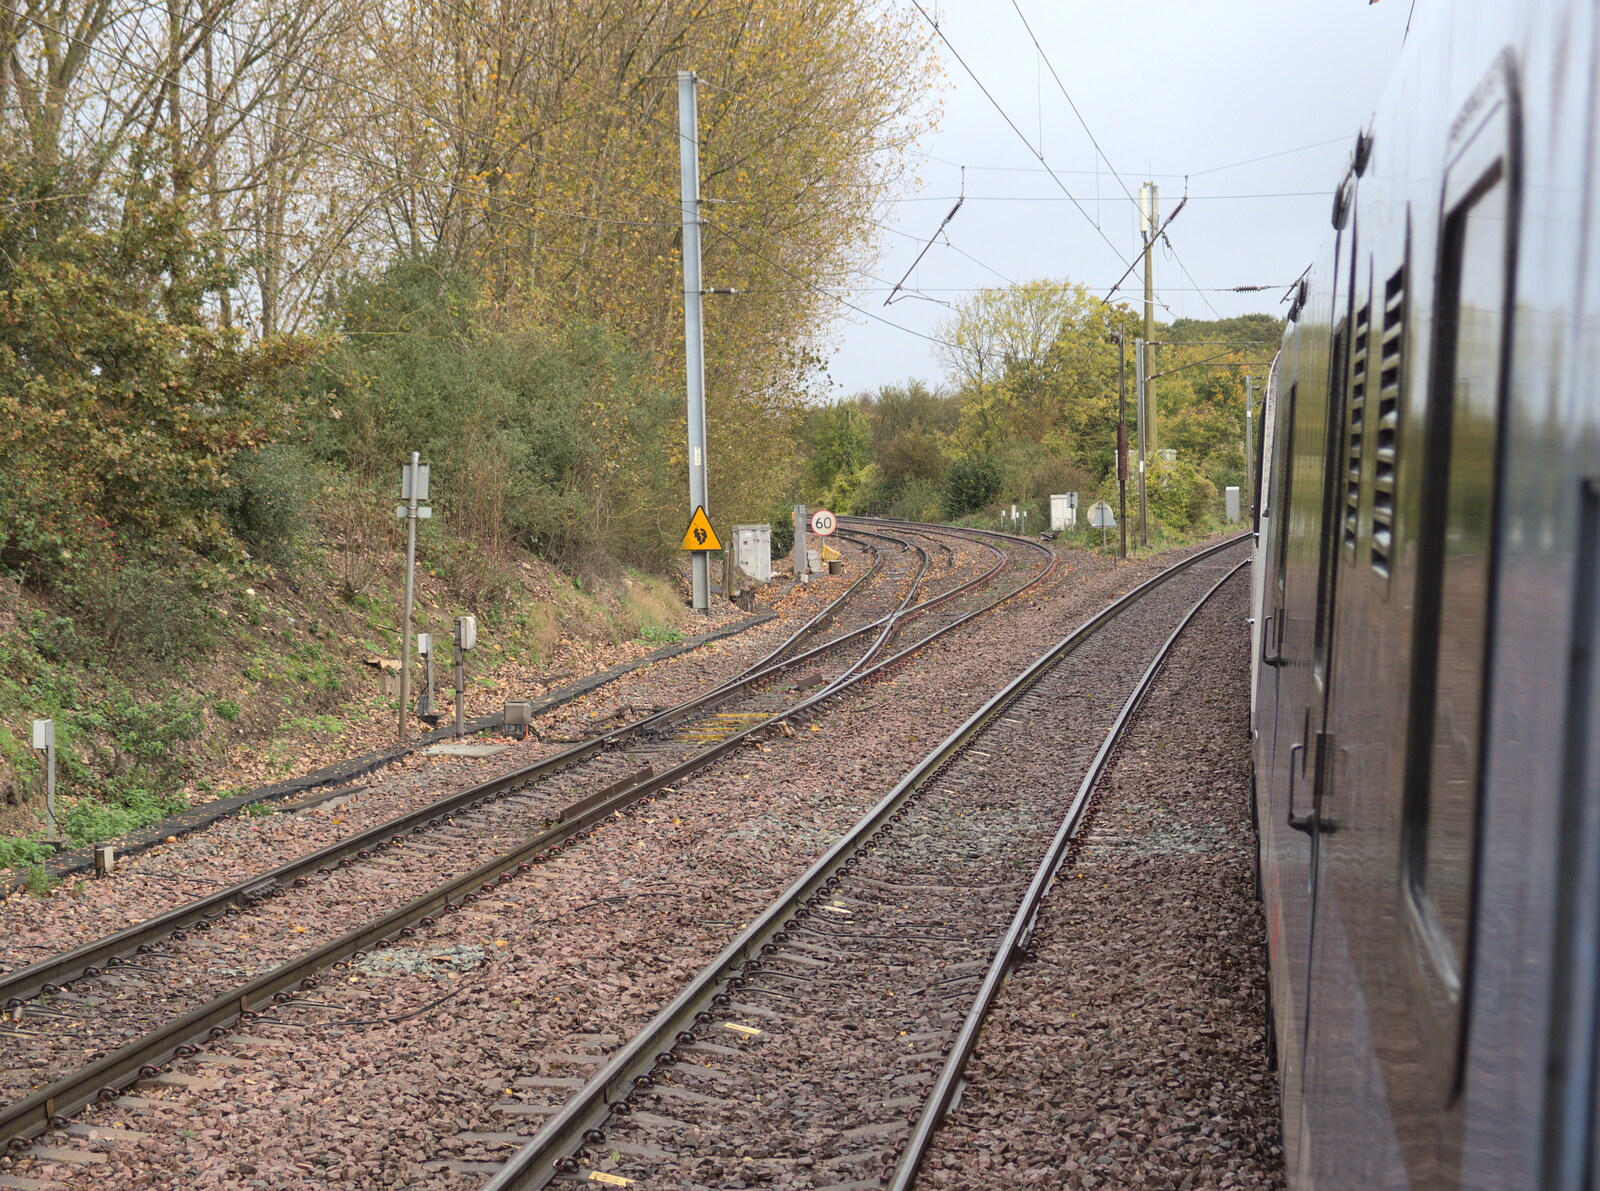 Haughley Junction off the mainline from (Very) Long Train (Not) Running, Stowmarket, Suffolk - 21st October 2014